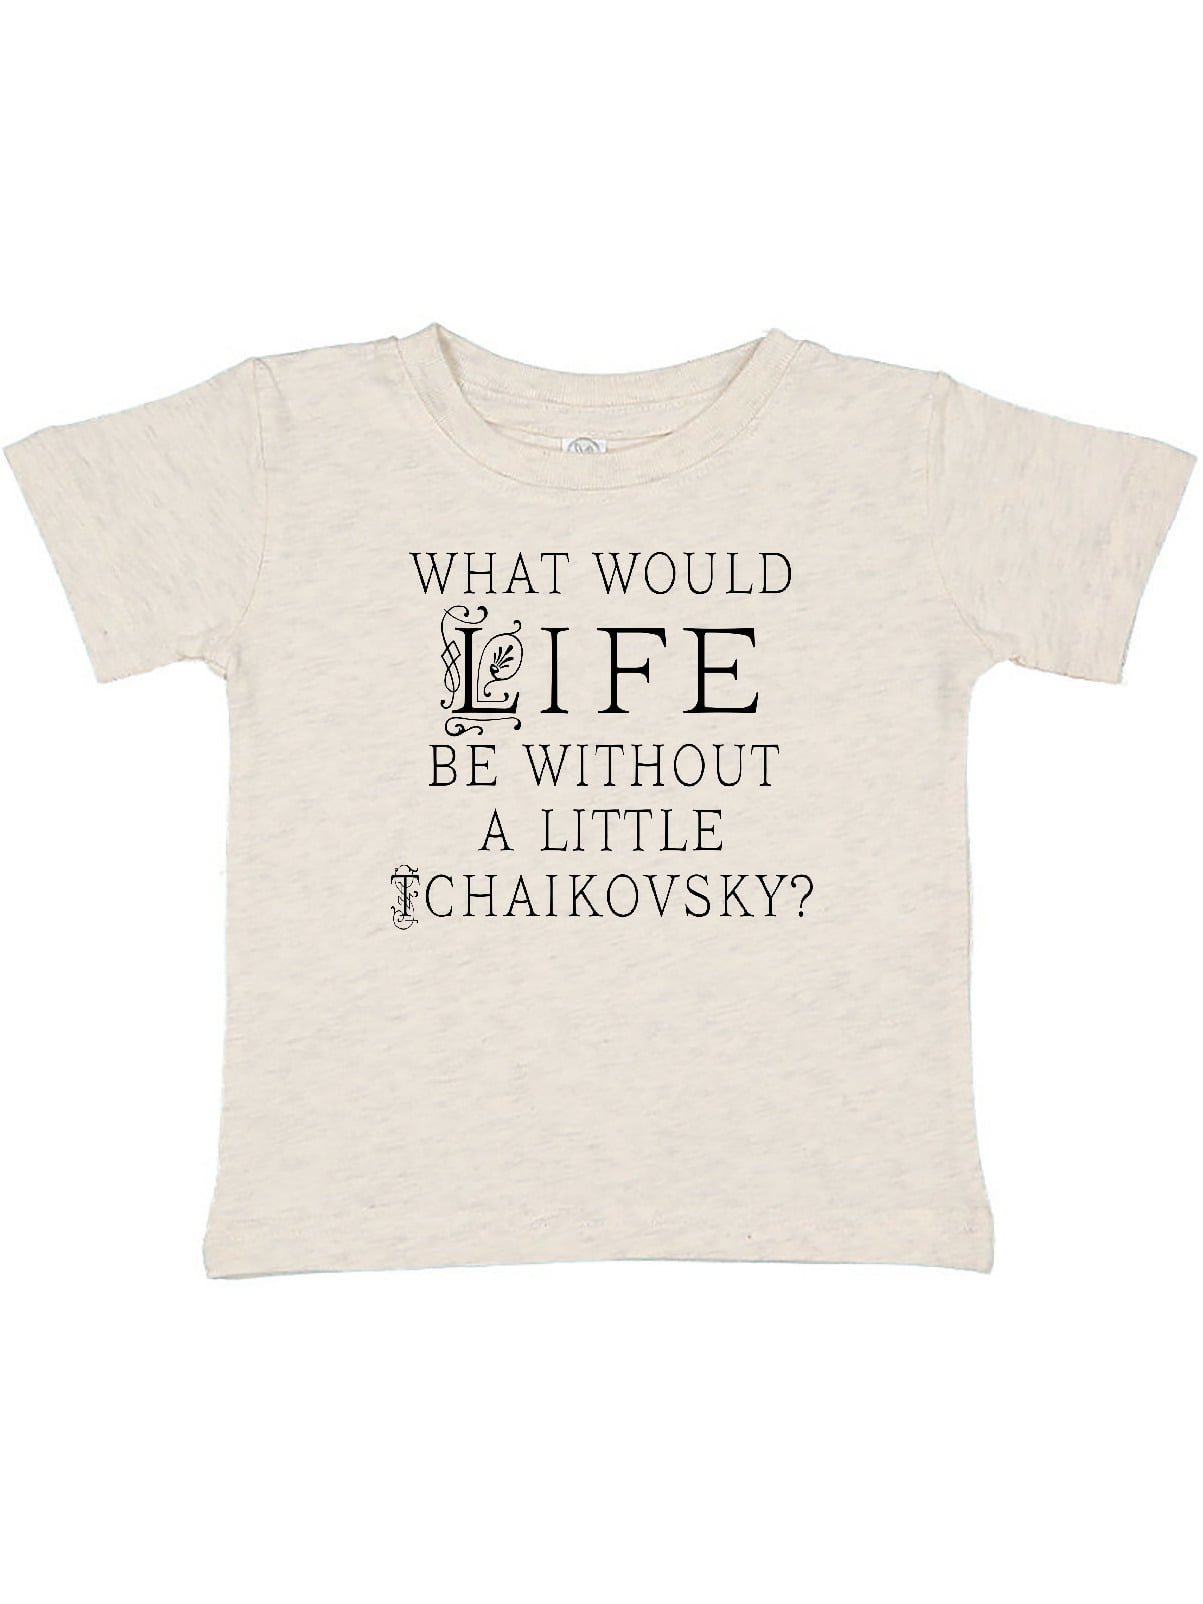 Classical Music Gift T-Shirt Funny Tchaikovsky cow